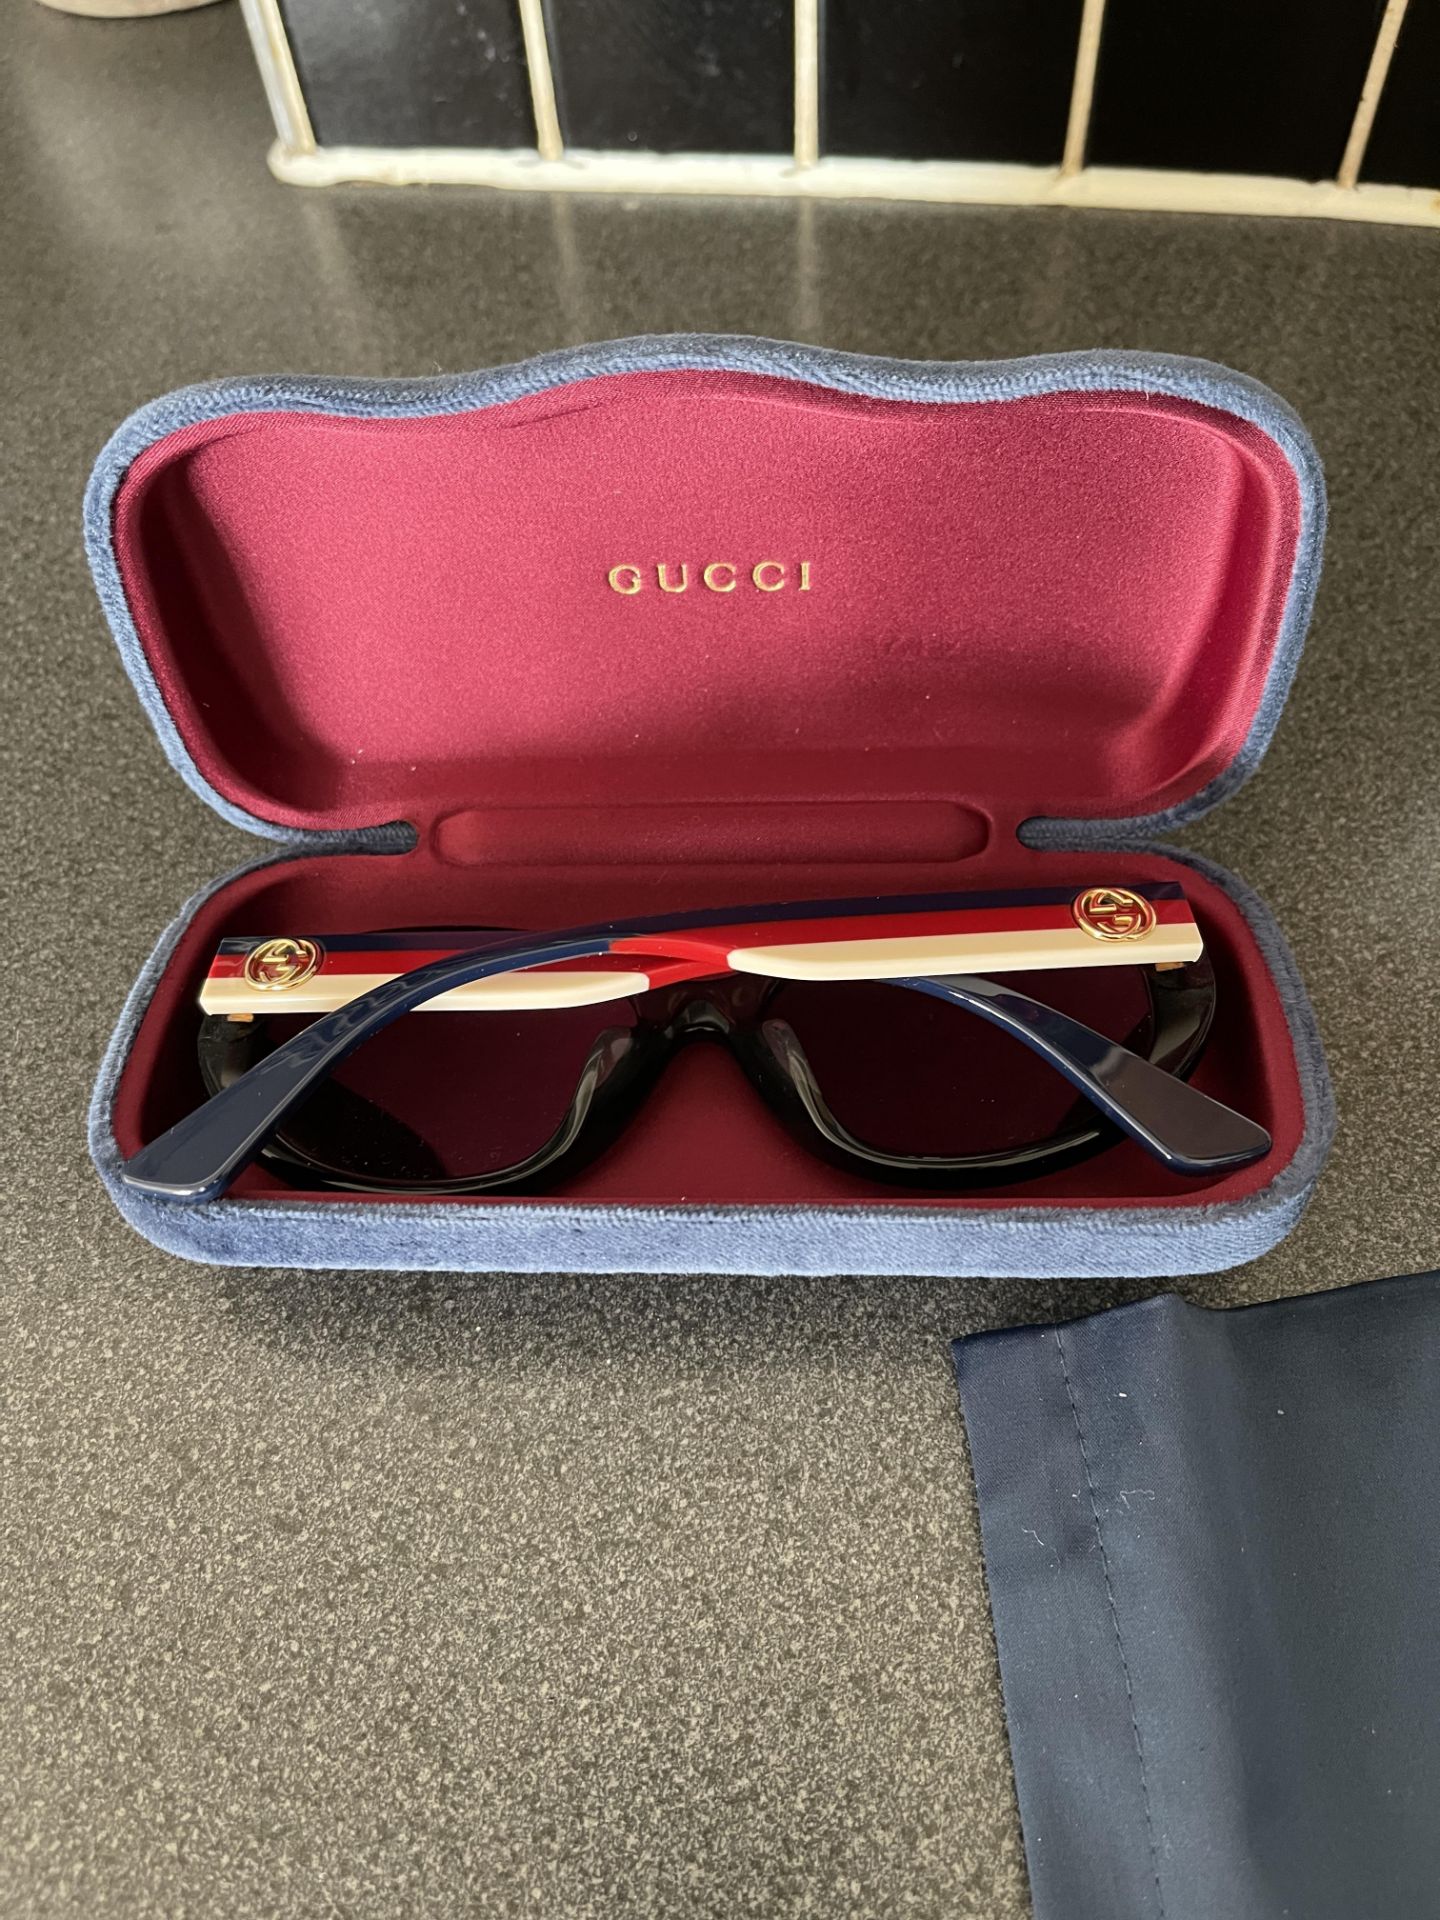 Gucci ladies sunglasses demon from a private jet charter. with case and cloth - Image 5 of 9